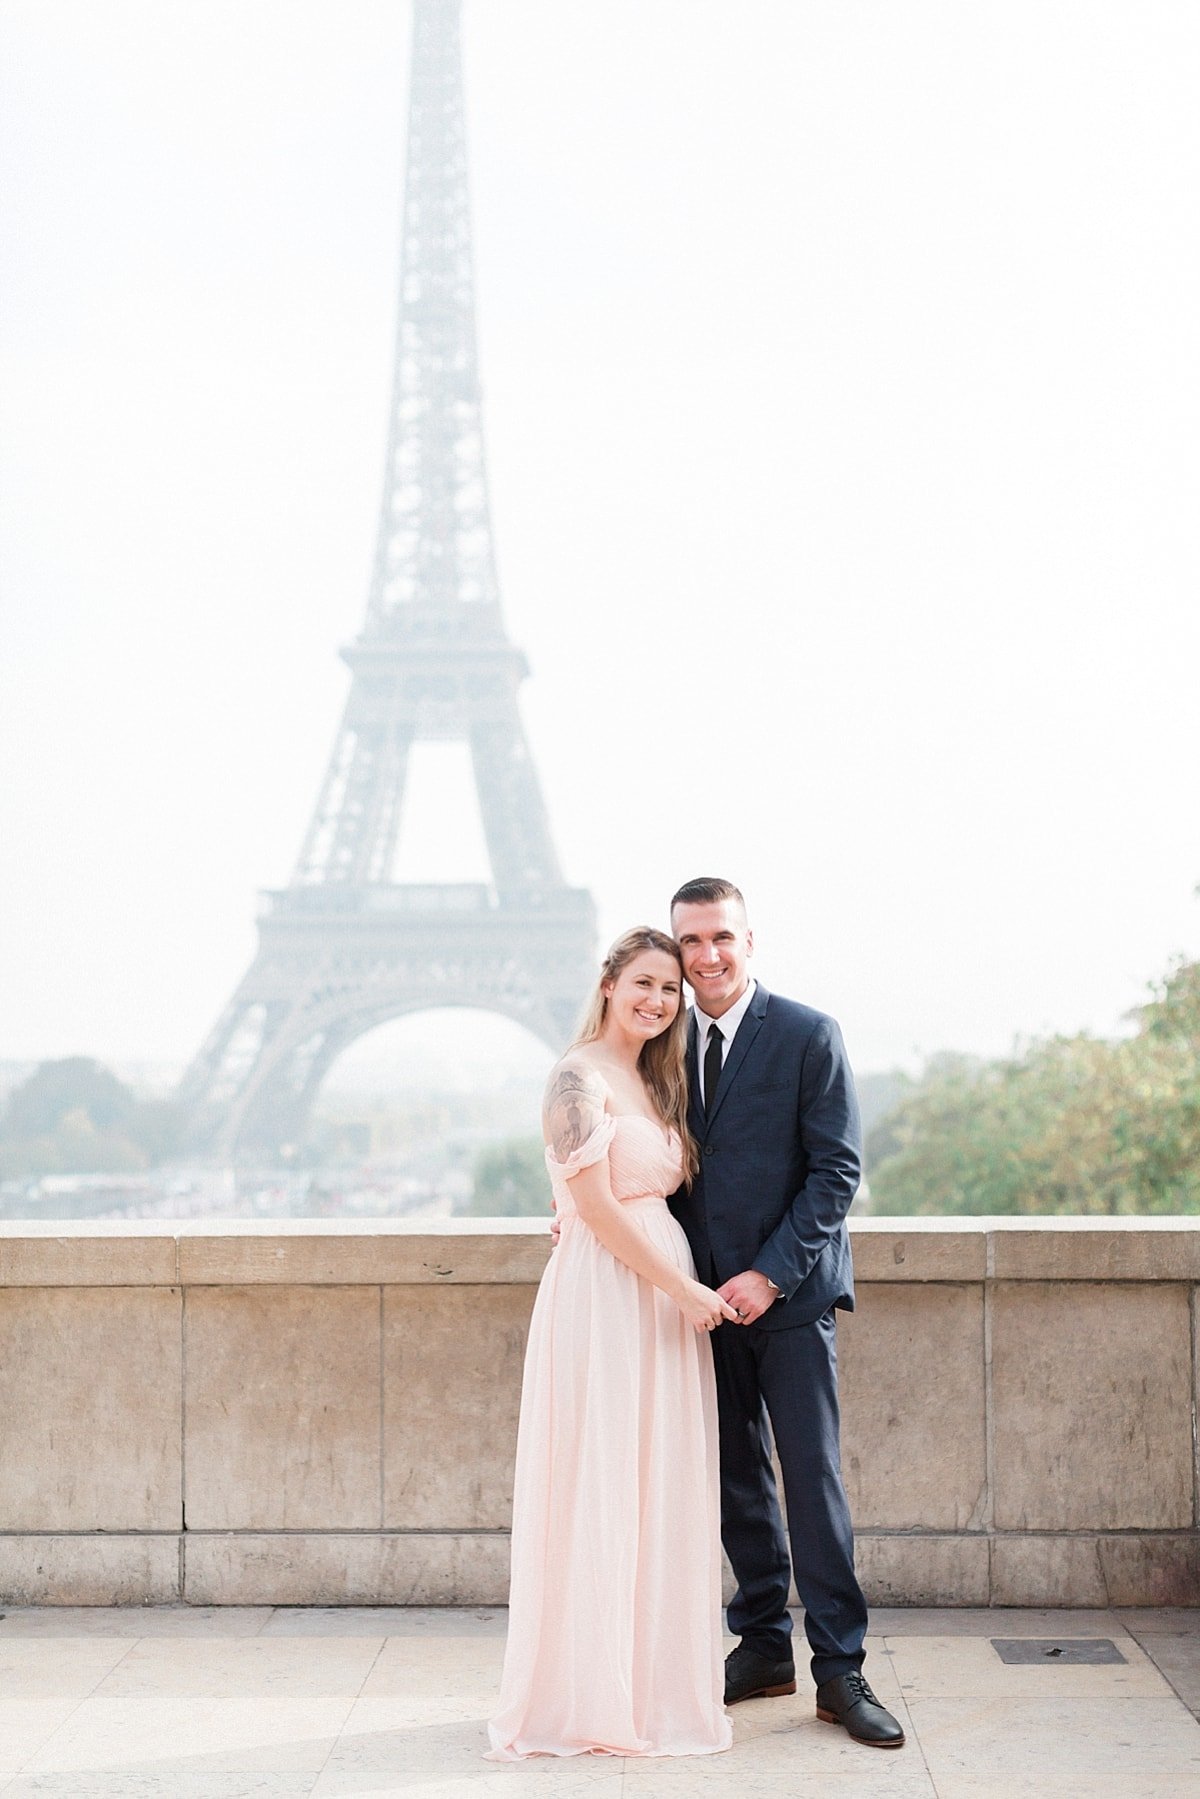 Paris, France anniversary session photographed at the Eiffel Tower by France Destination Wedding Photographer, Alicia Yarrish Photography